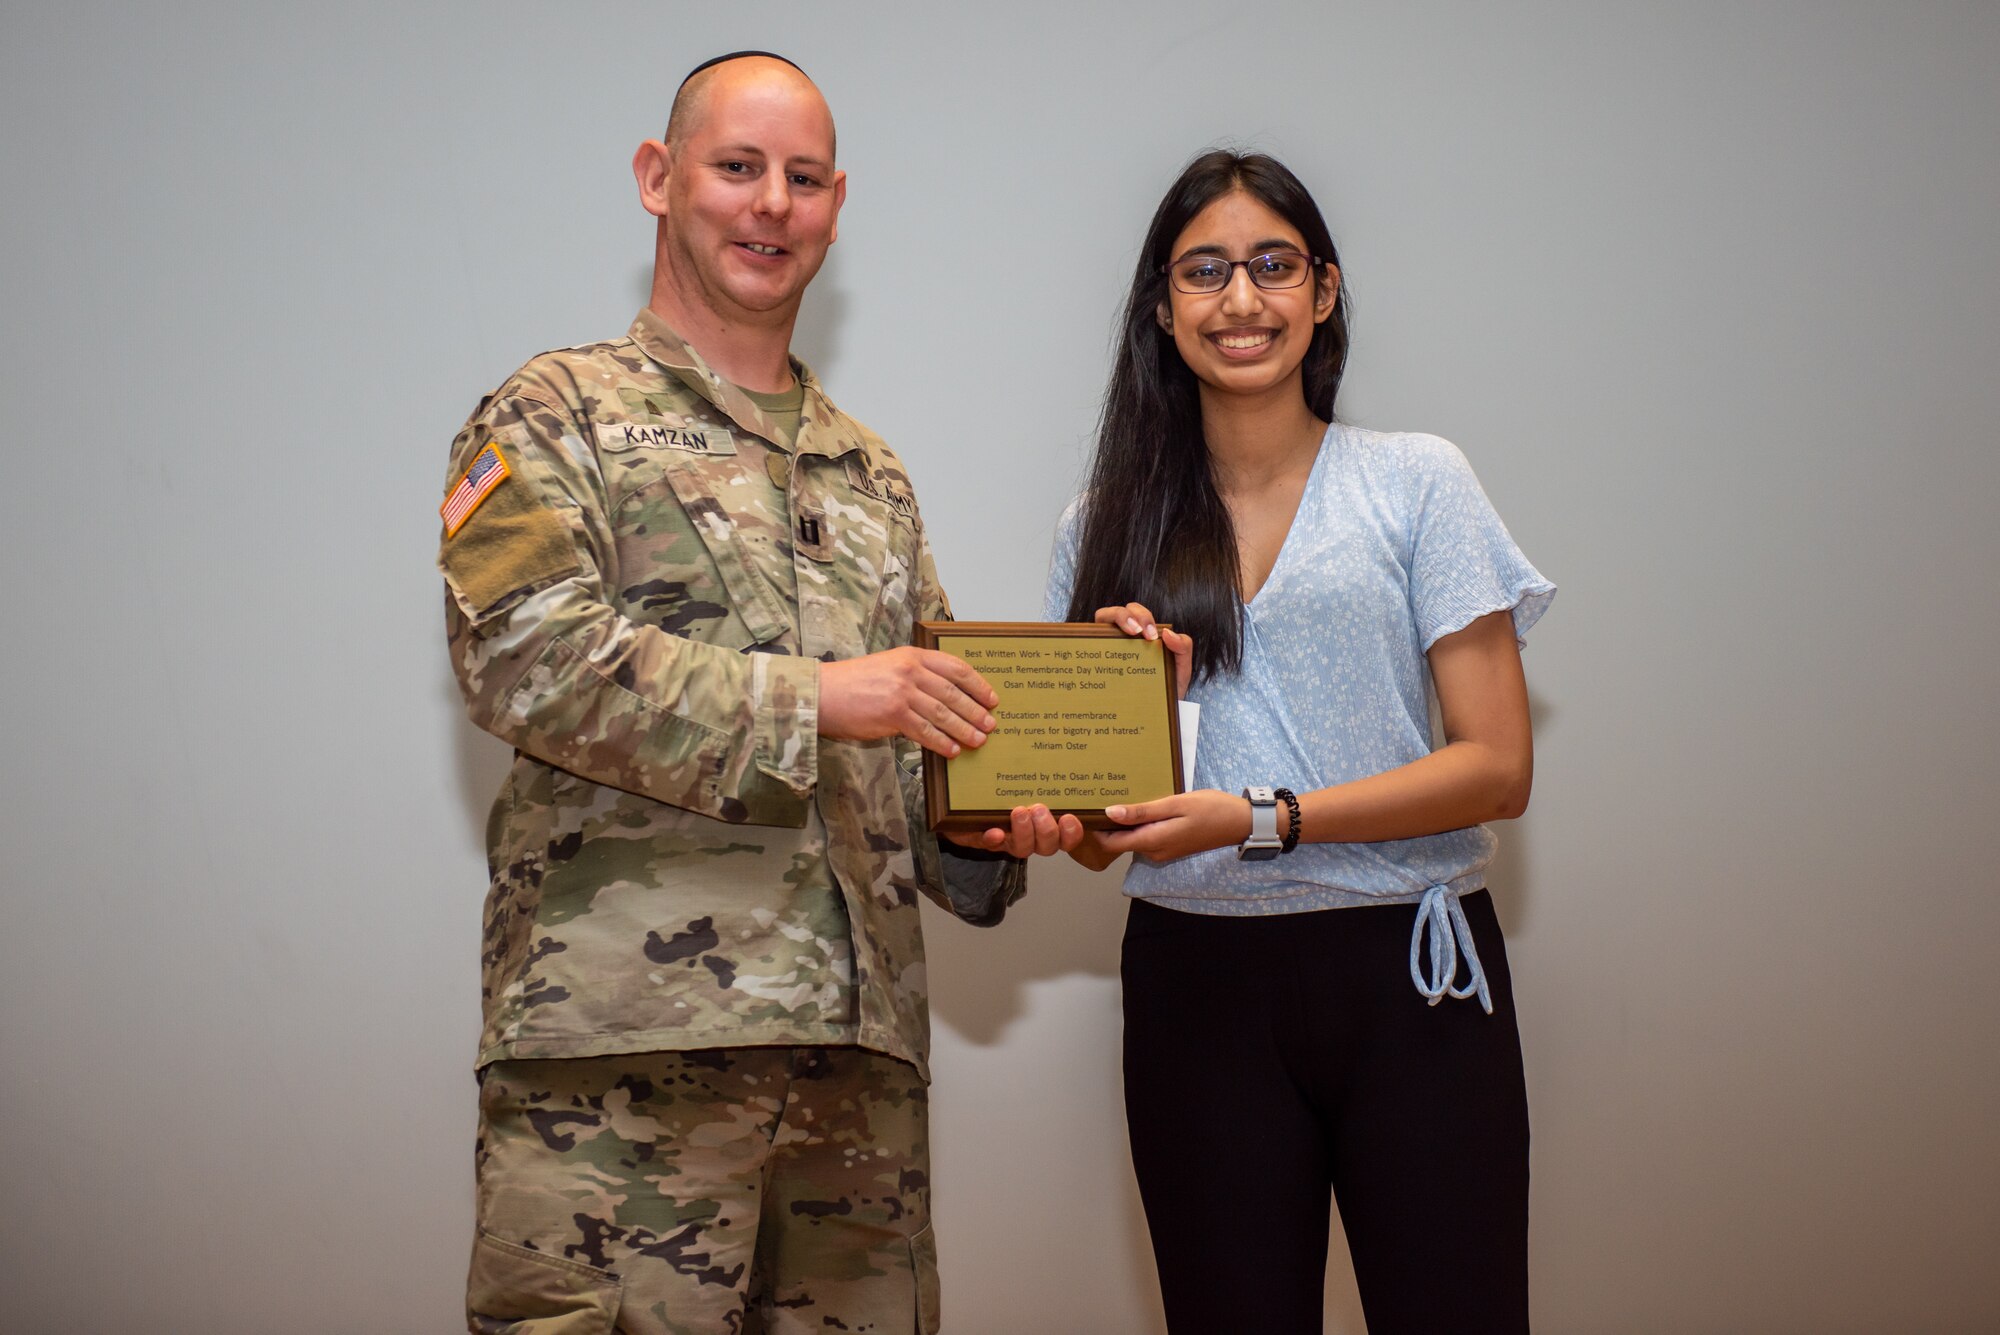 U.S. Army CPT Daniel Kamzan, 23d Chemical, Biological, Radiological and Nuclear Battalion Chaplain at Camp Humphreys, presents Ari Ramdatt, Osan Middle High School student, with an award for the Holocaust Rememberance Day writing contest April 28, 2022 at Osan Air Base, Republic of Korea.